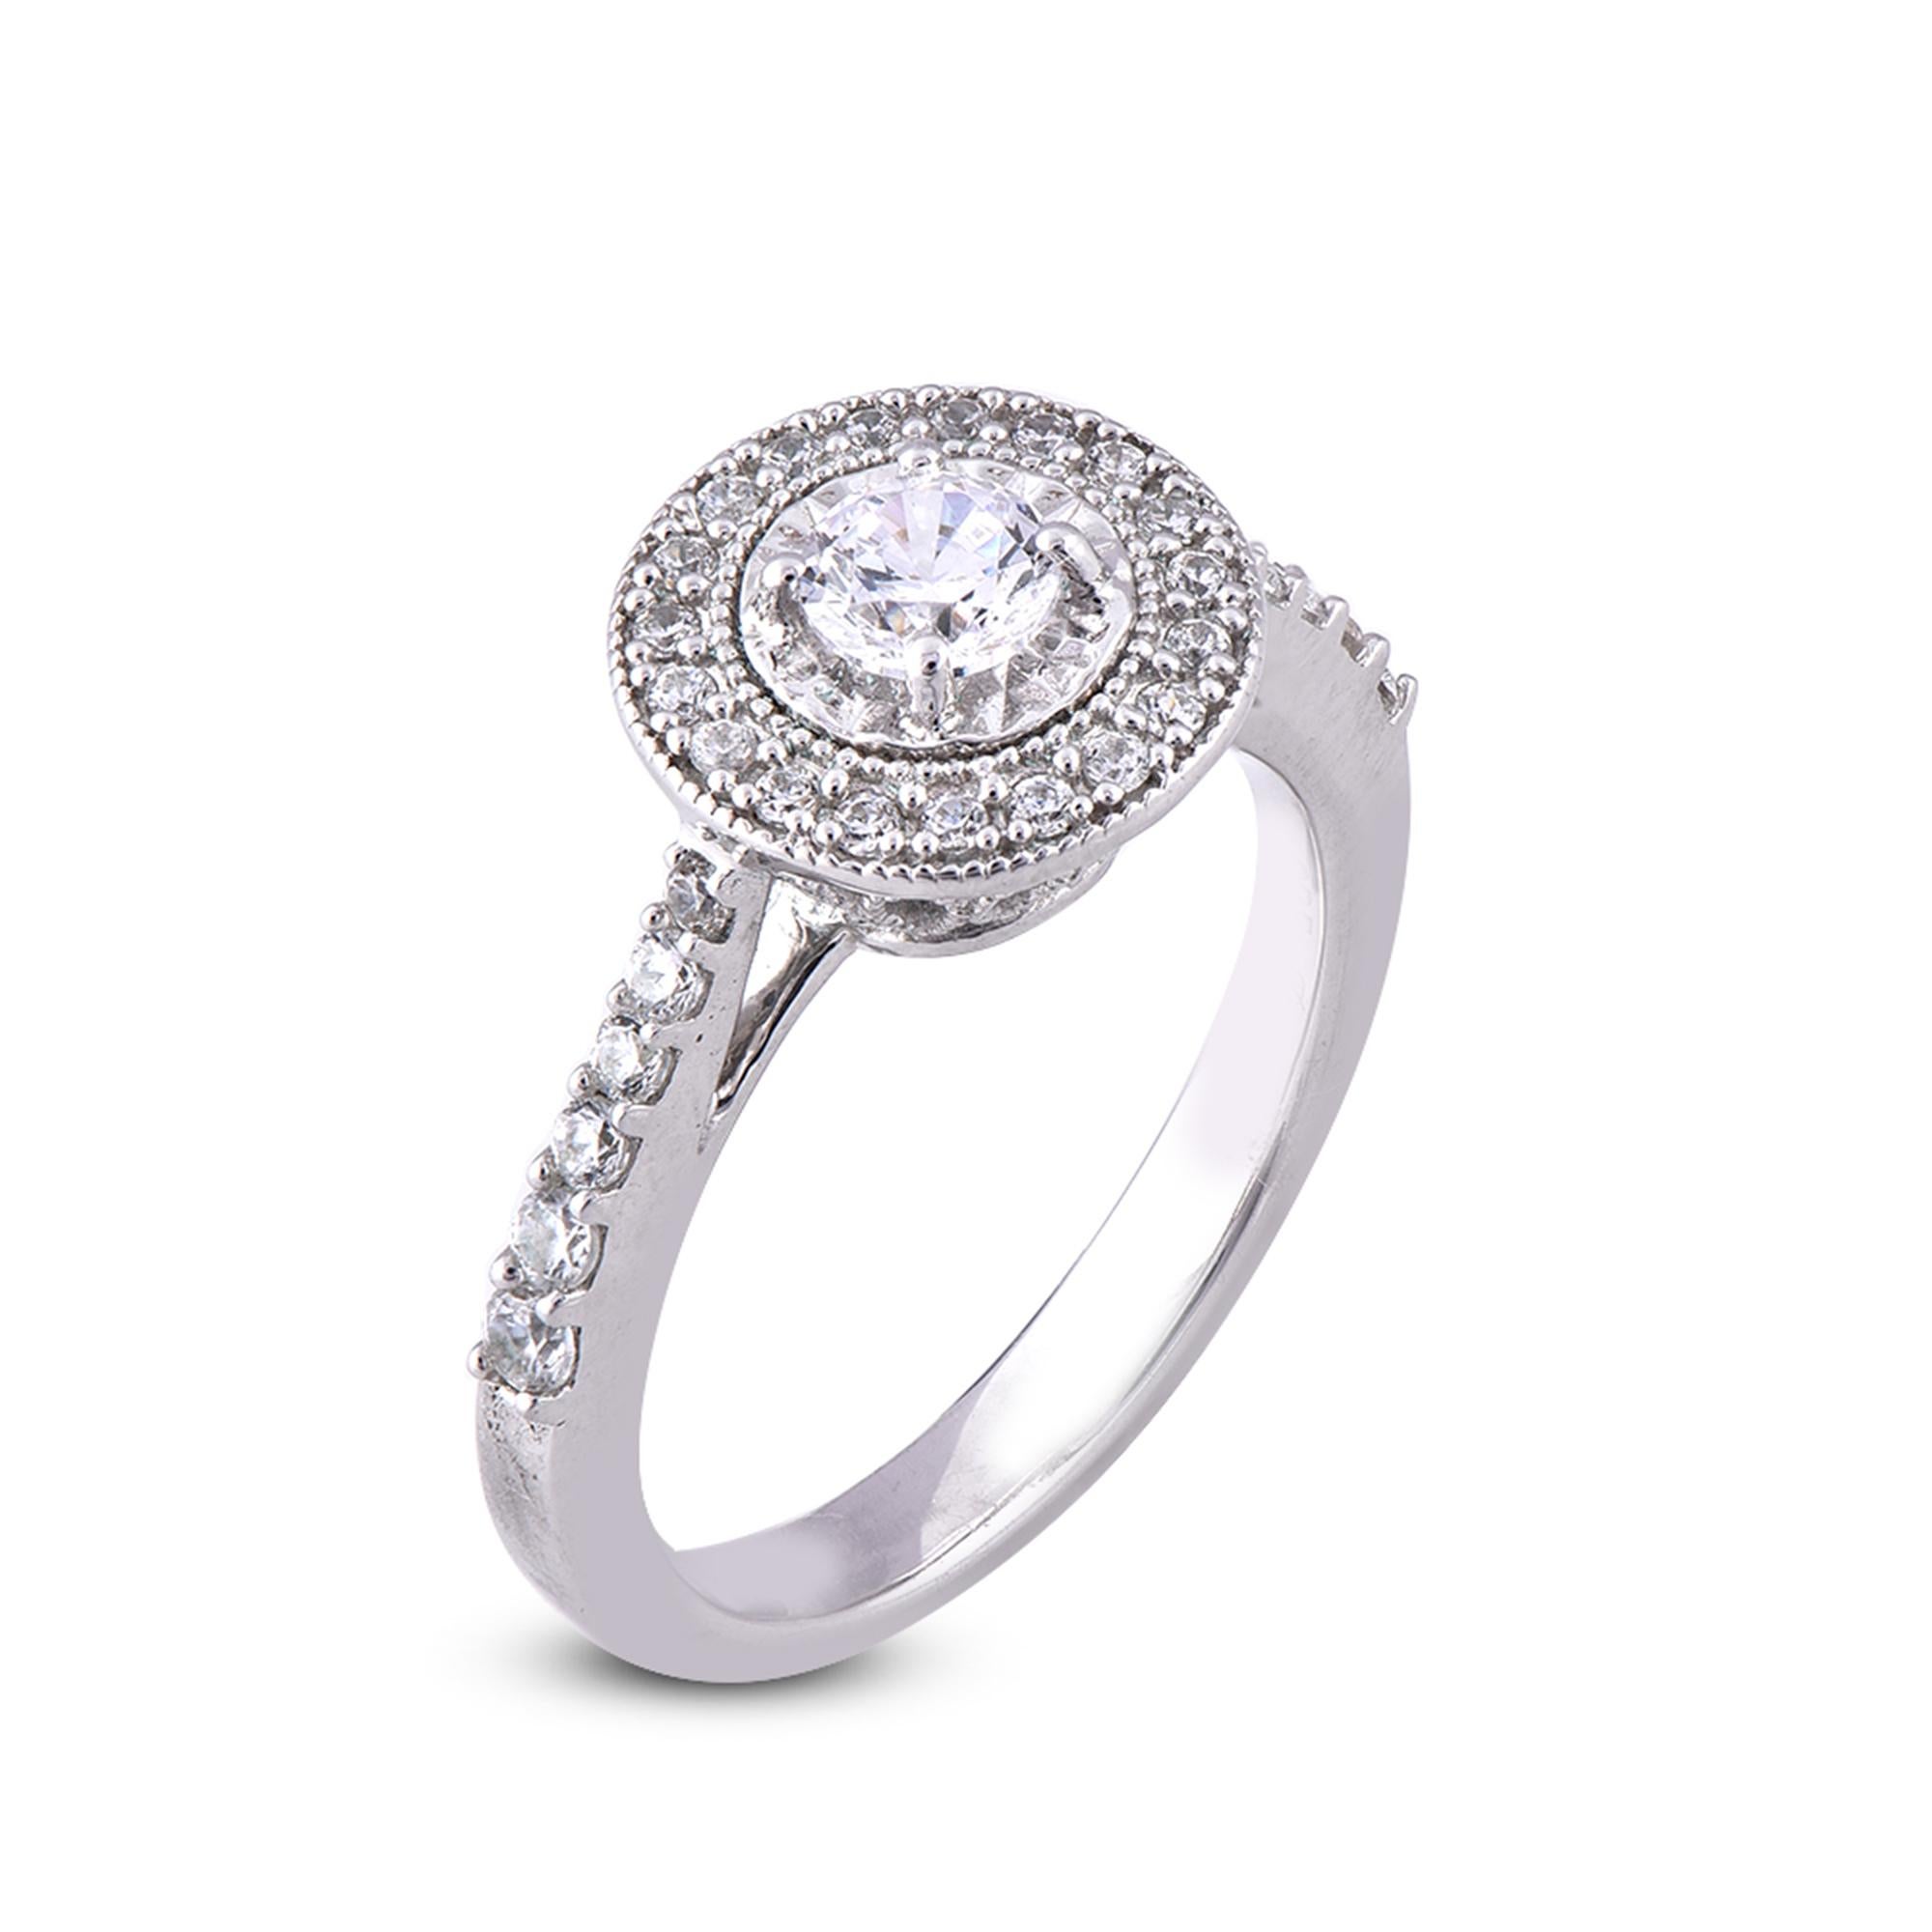 This diamond engagement ring is expertly crafted in 18 Karat White Gold and features 0.32 ct centre stone and 0.34 ct of diamond frame and shank lined diamonds set in prong setting. The diamond are natural, not treated and dazzles in G-H color SI1-2